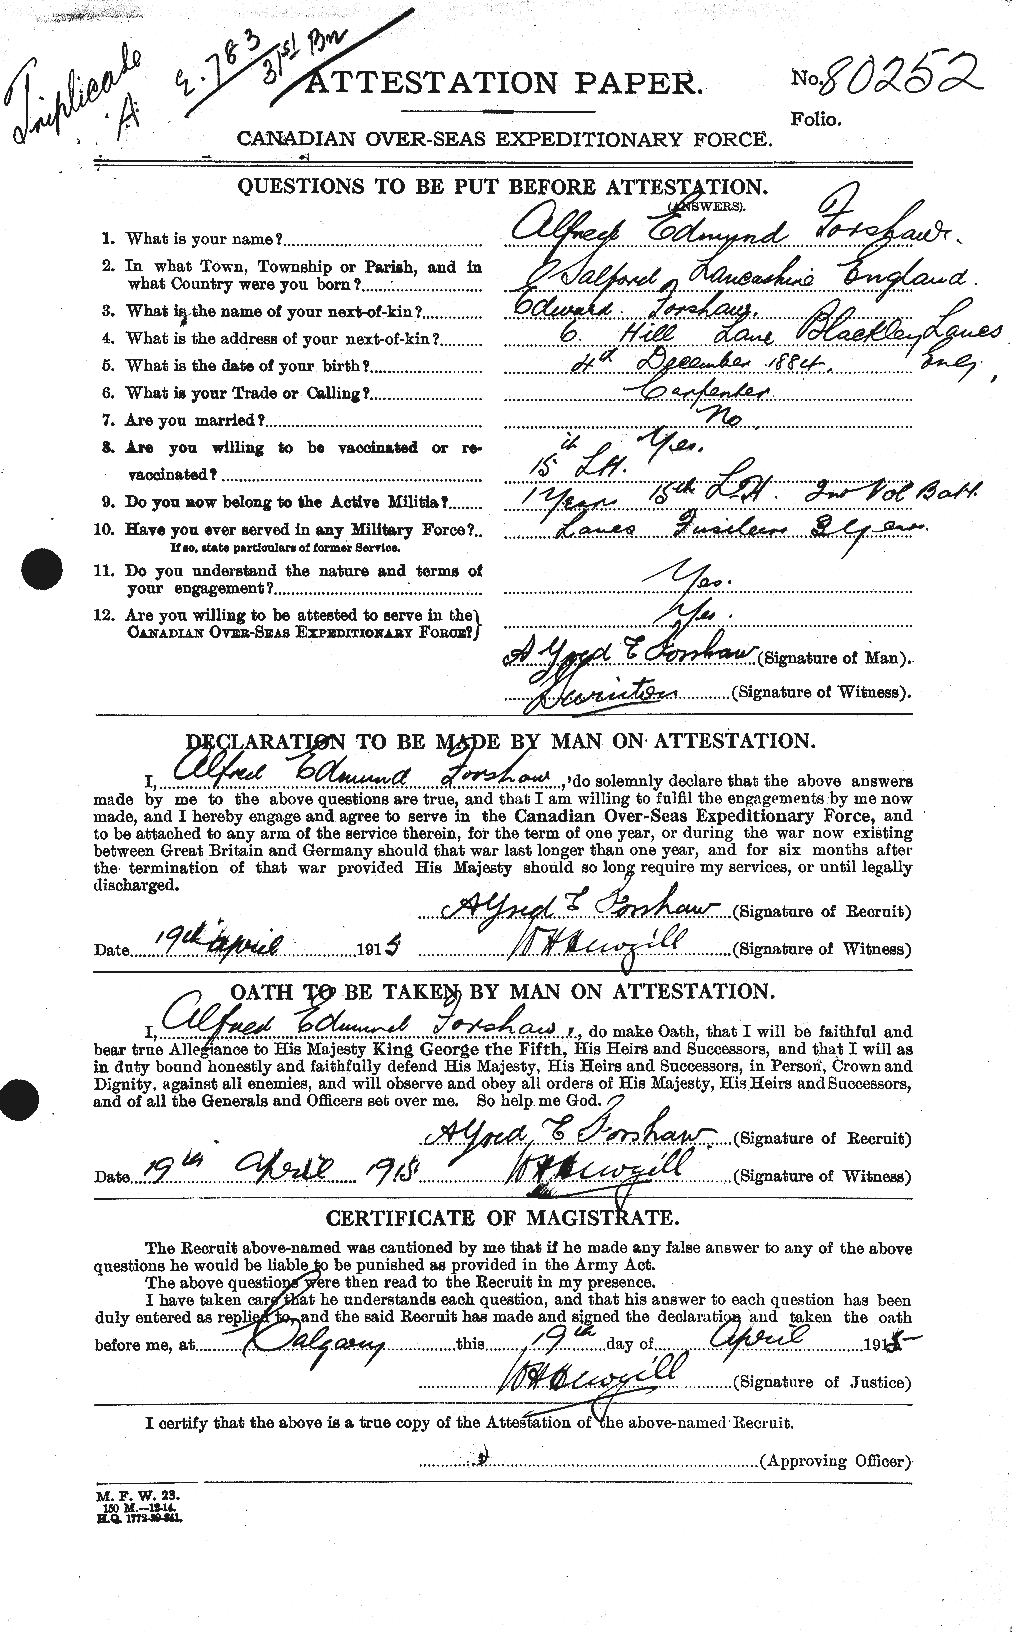 Personnel Records of the First World War - CEF 329660a